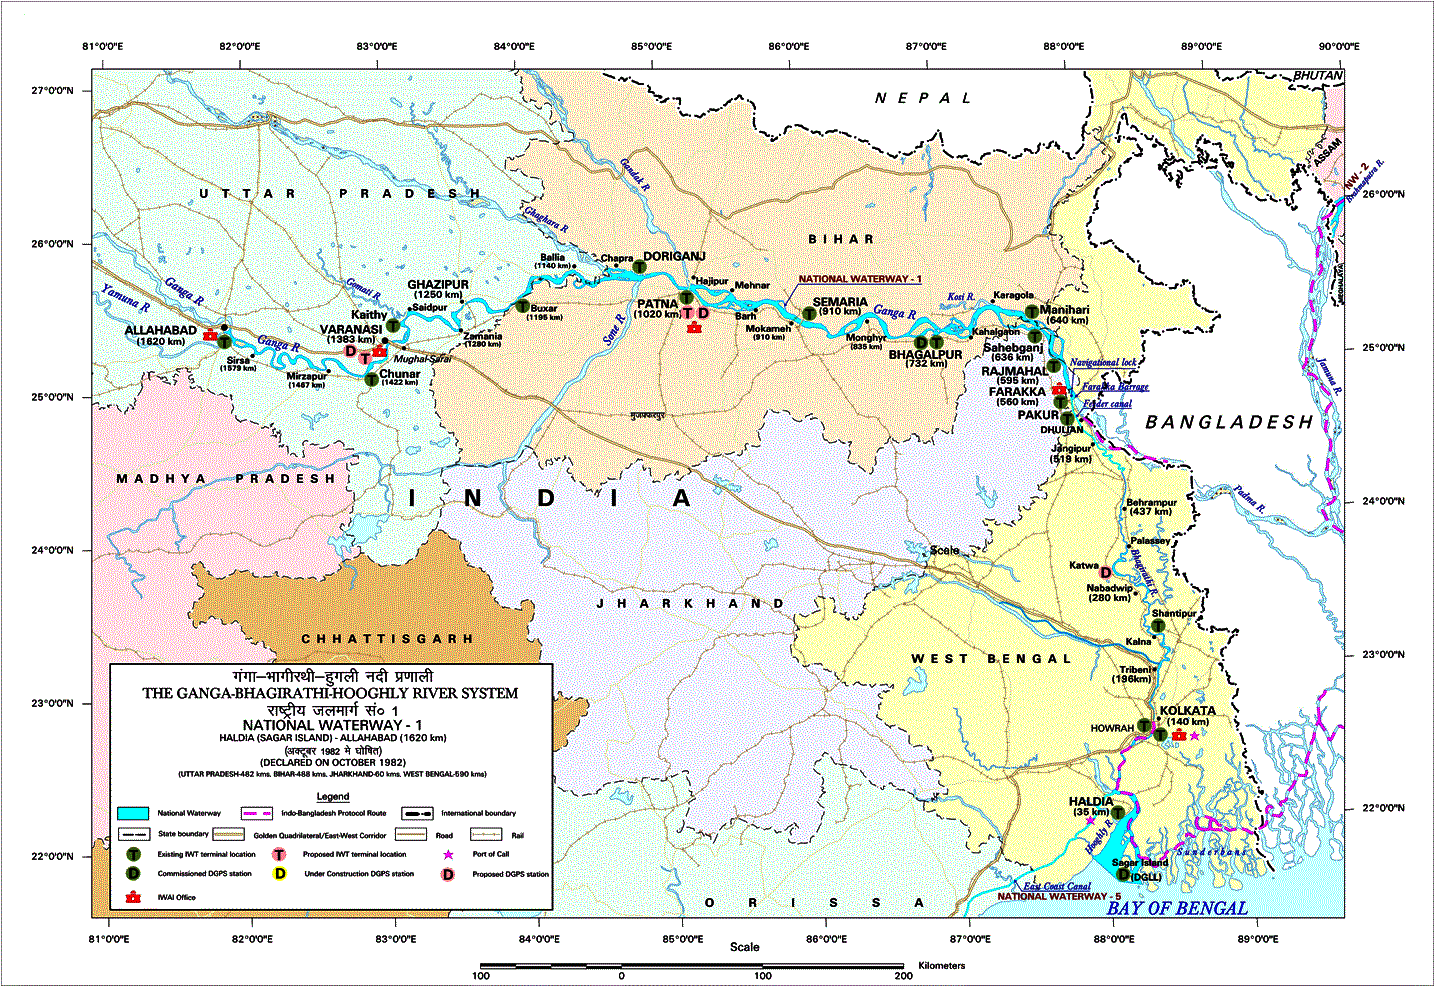 The stretch of the Ganga designated as National Waterway 1